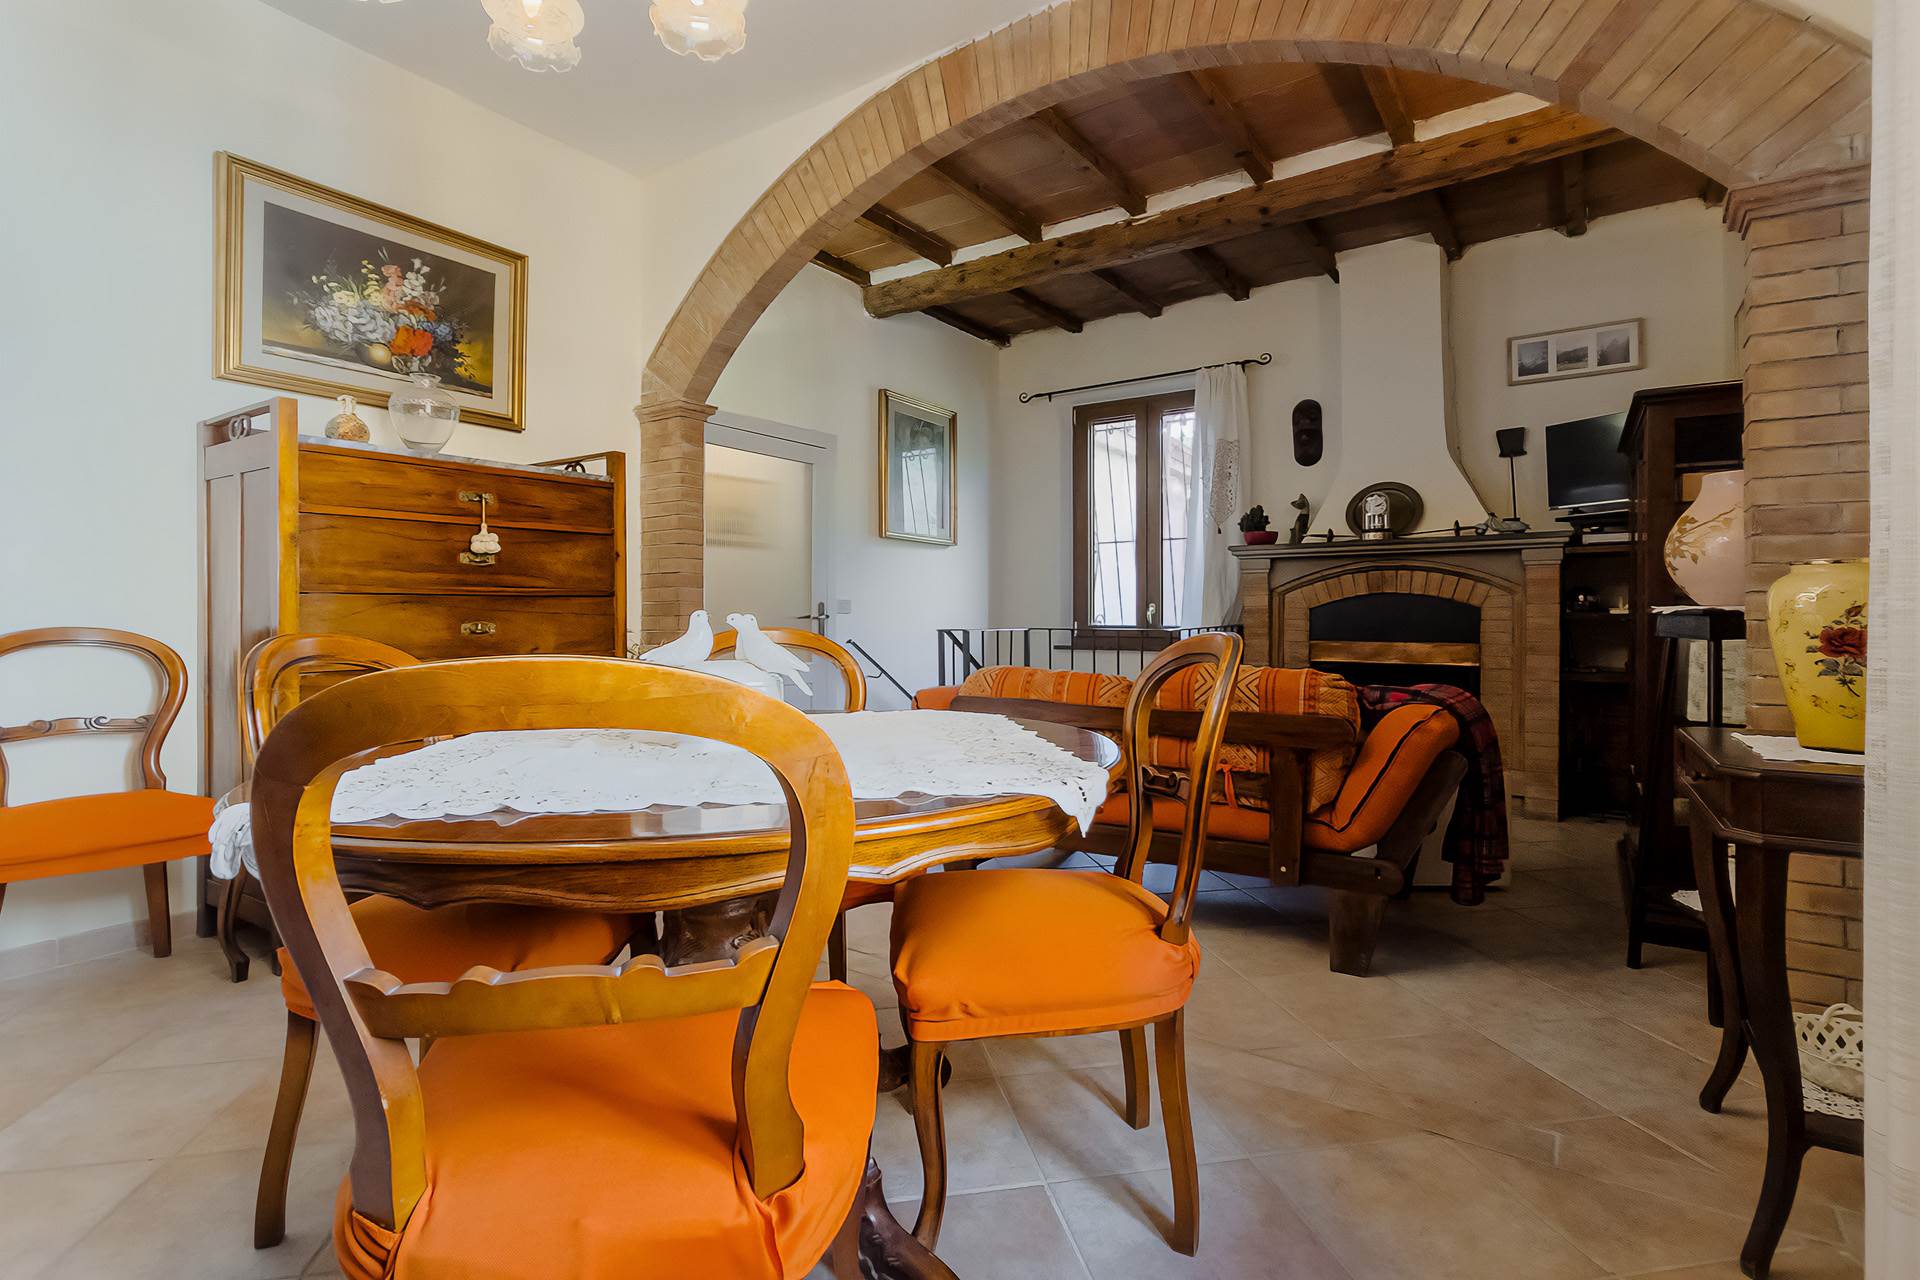 We are in Rosia where this exclusive independent apartment, with an entrance that embodies the elegance and history of the region, is a true gem 